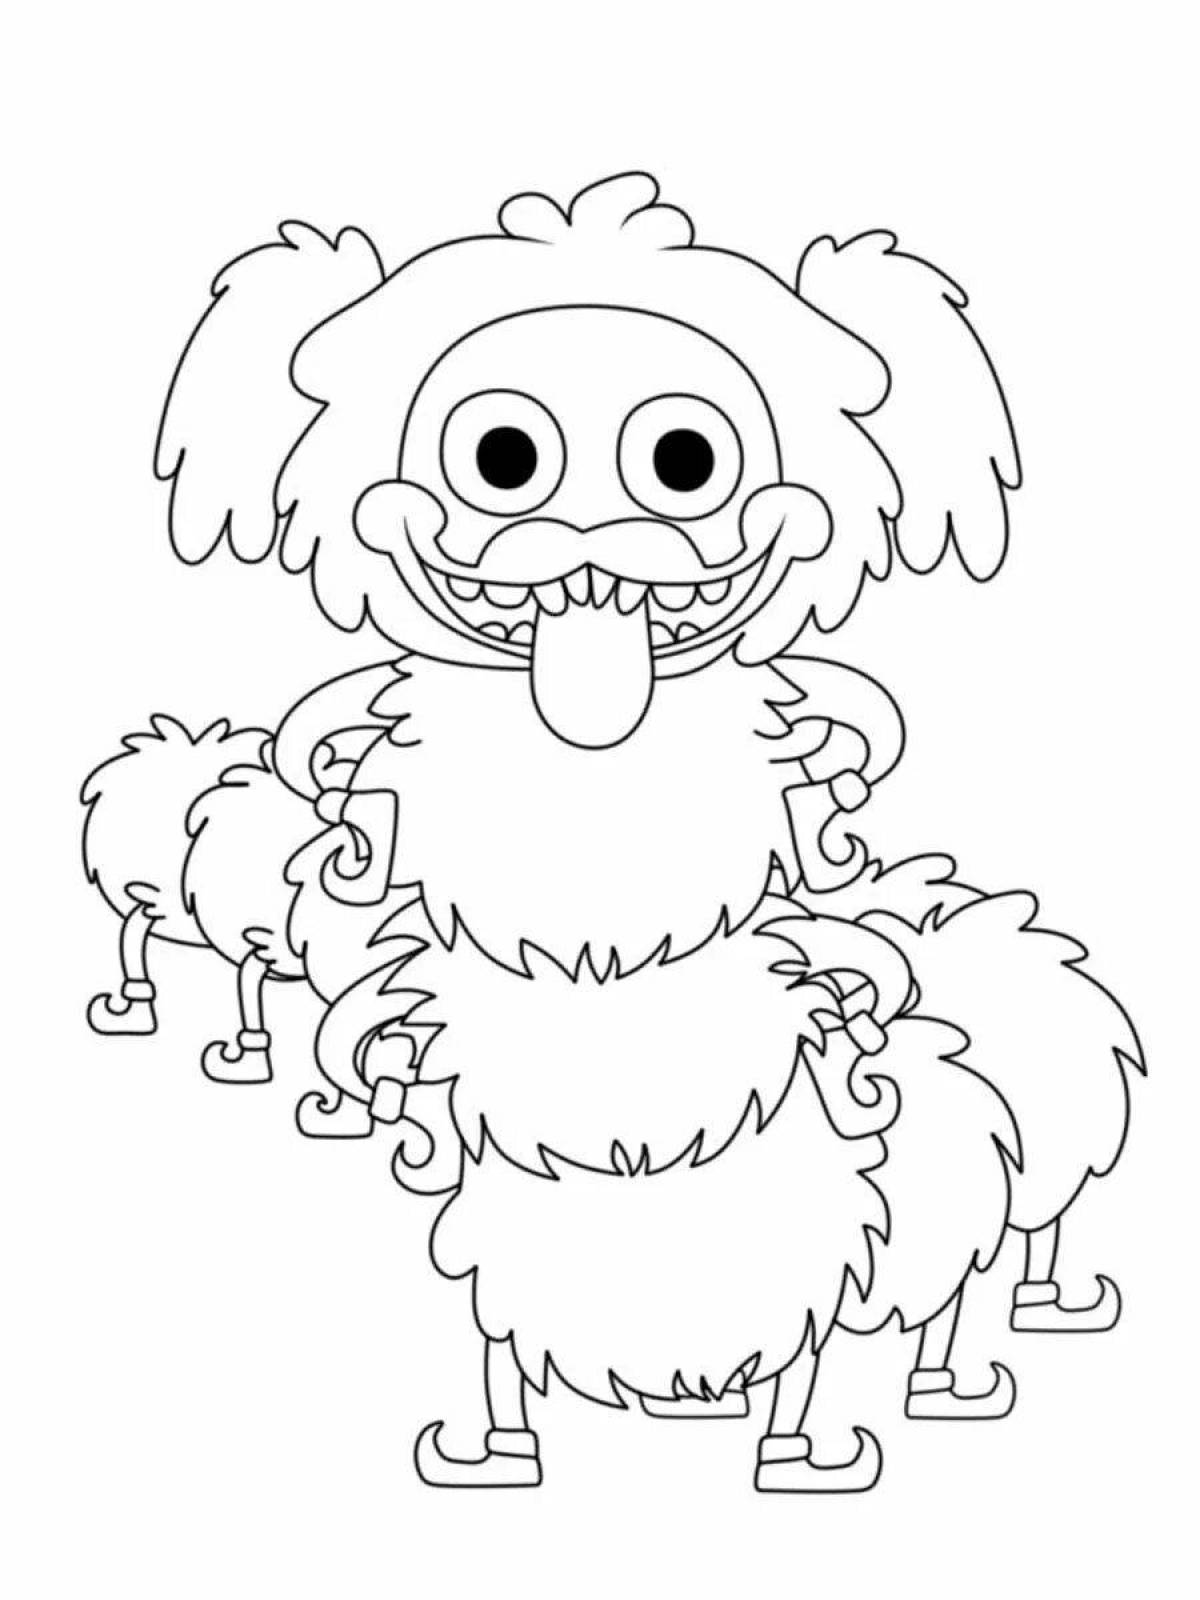 Pj caterpillar funny coloring page